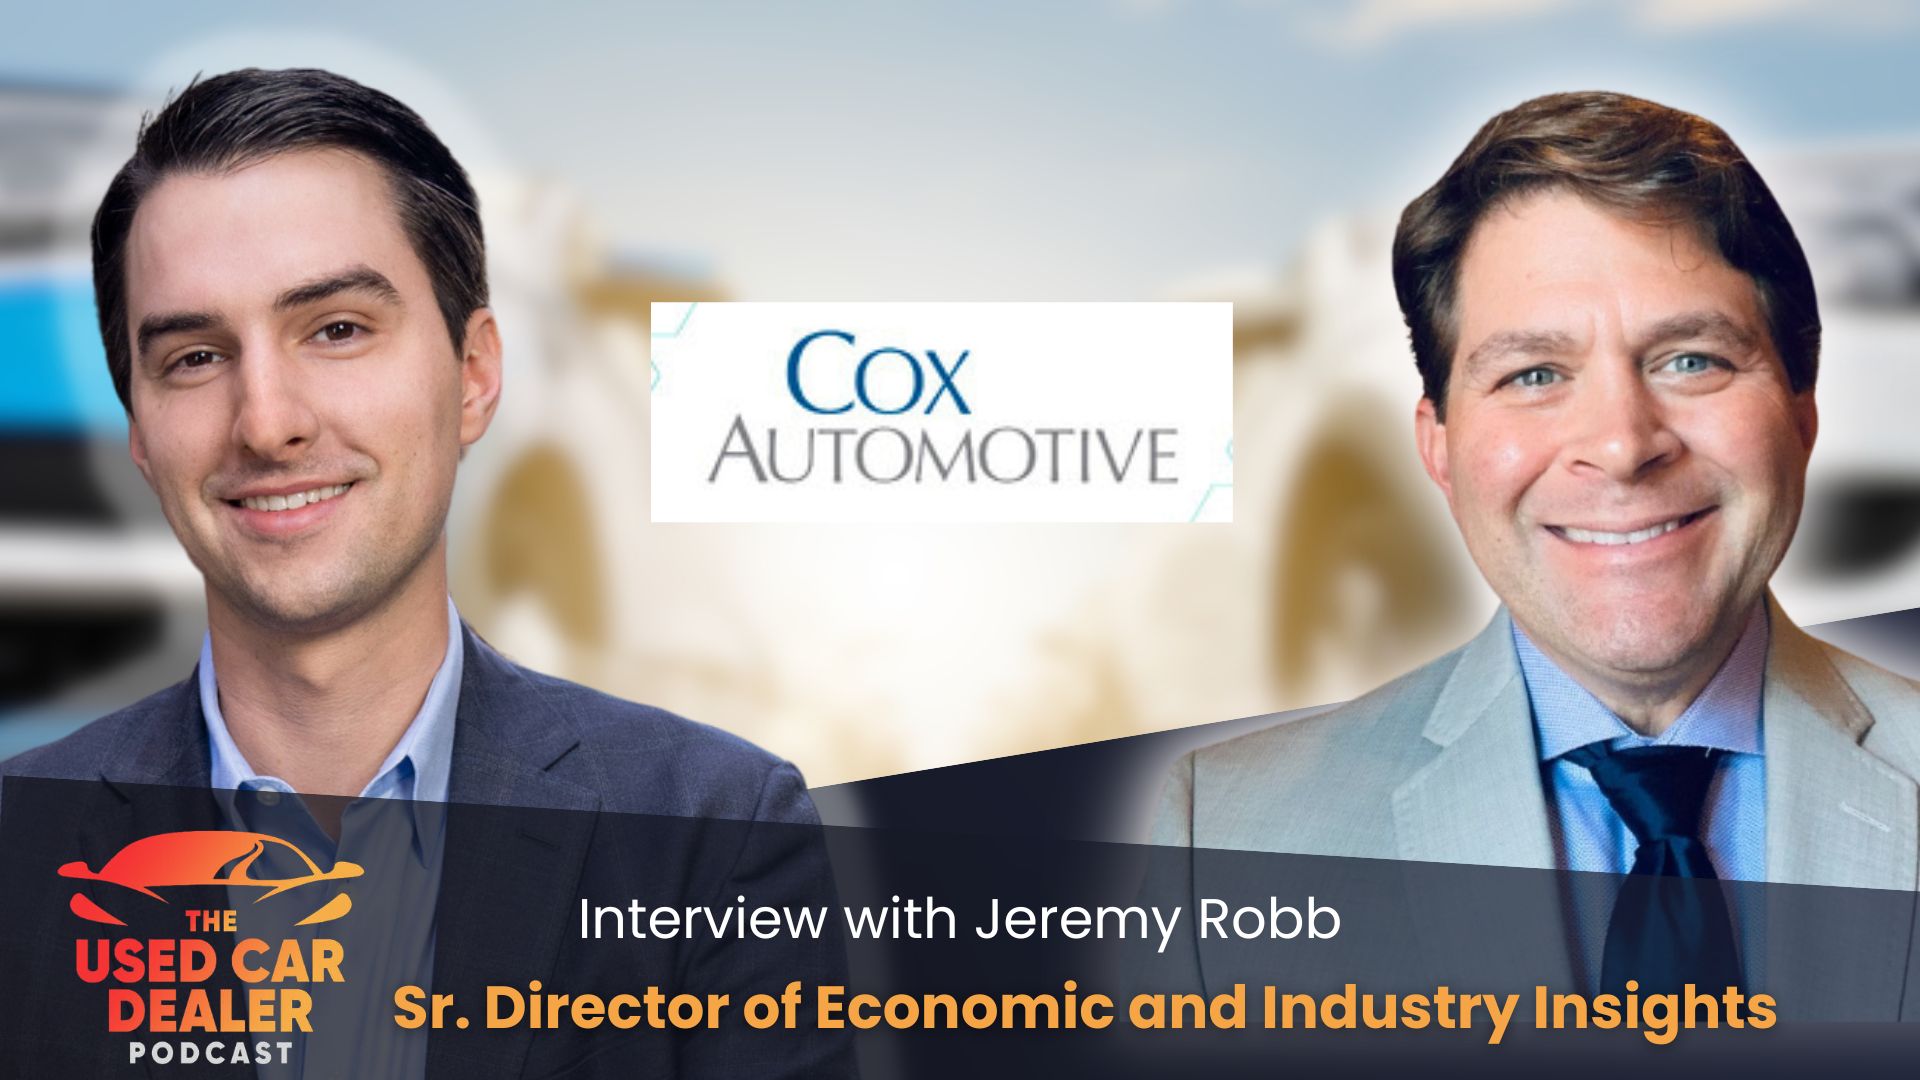 Interview with Jeremy Robb, Cox Automotive's Sr. Director of Economic and Industry Insights